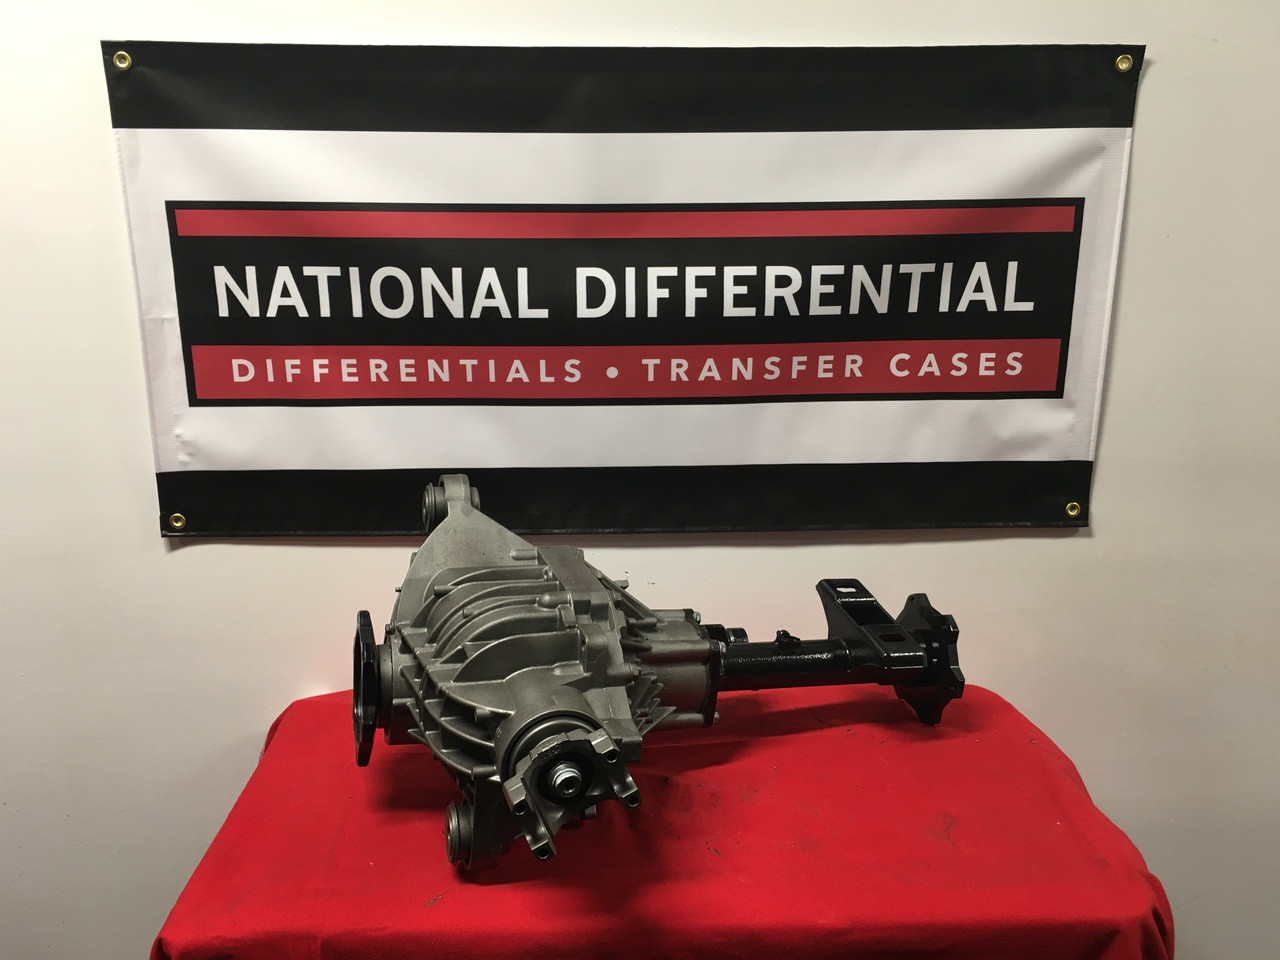 9.25-inch Front Differential for 1999, 2000, 2001, 2002, 2003, 2004, 2005, 2006, 2007, 2008, 2009, 2010 GMC Sierra 2500 available with 3.73 or 4.10 gear ratios